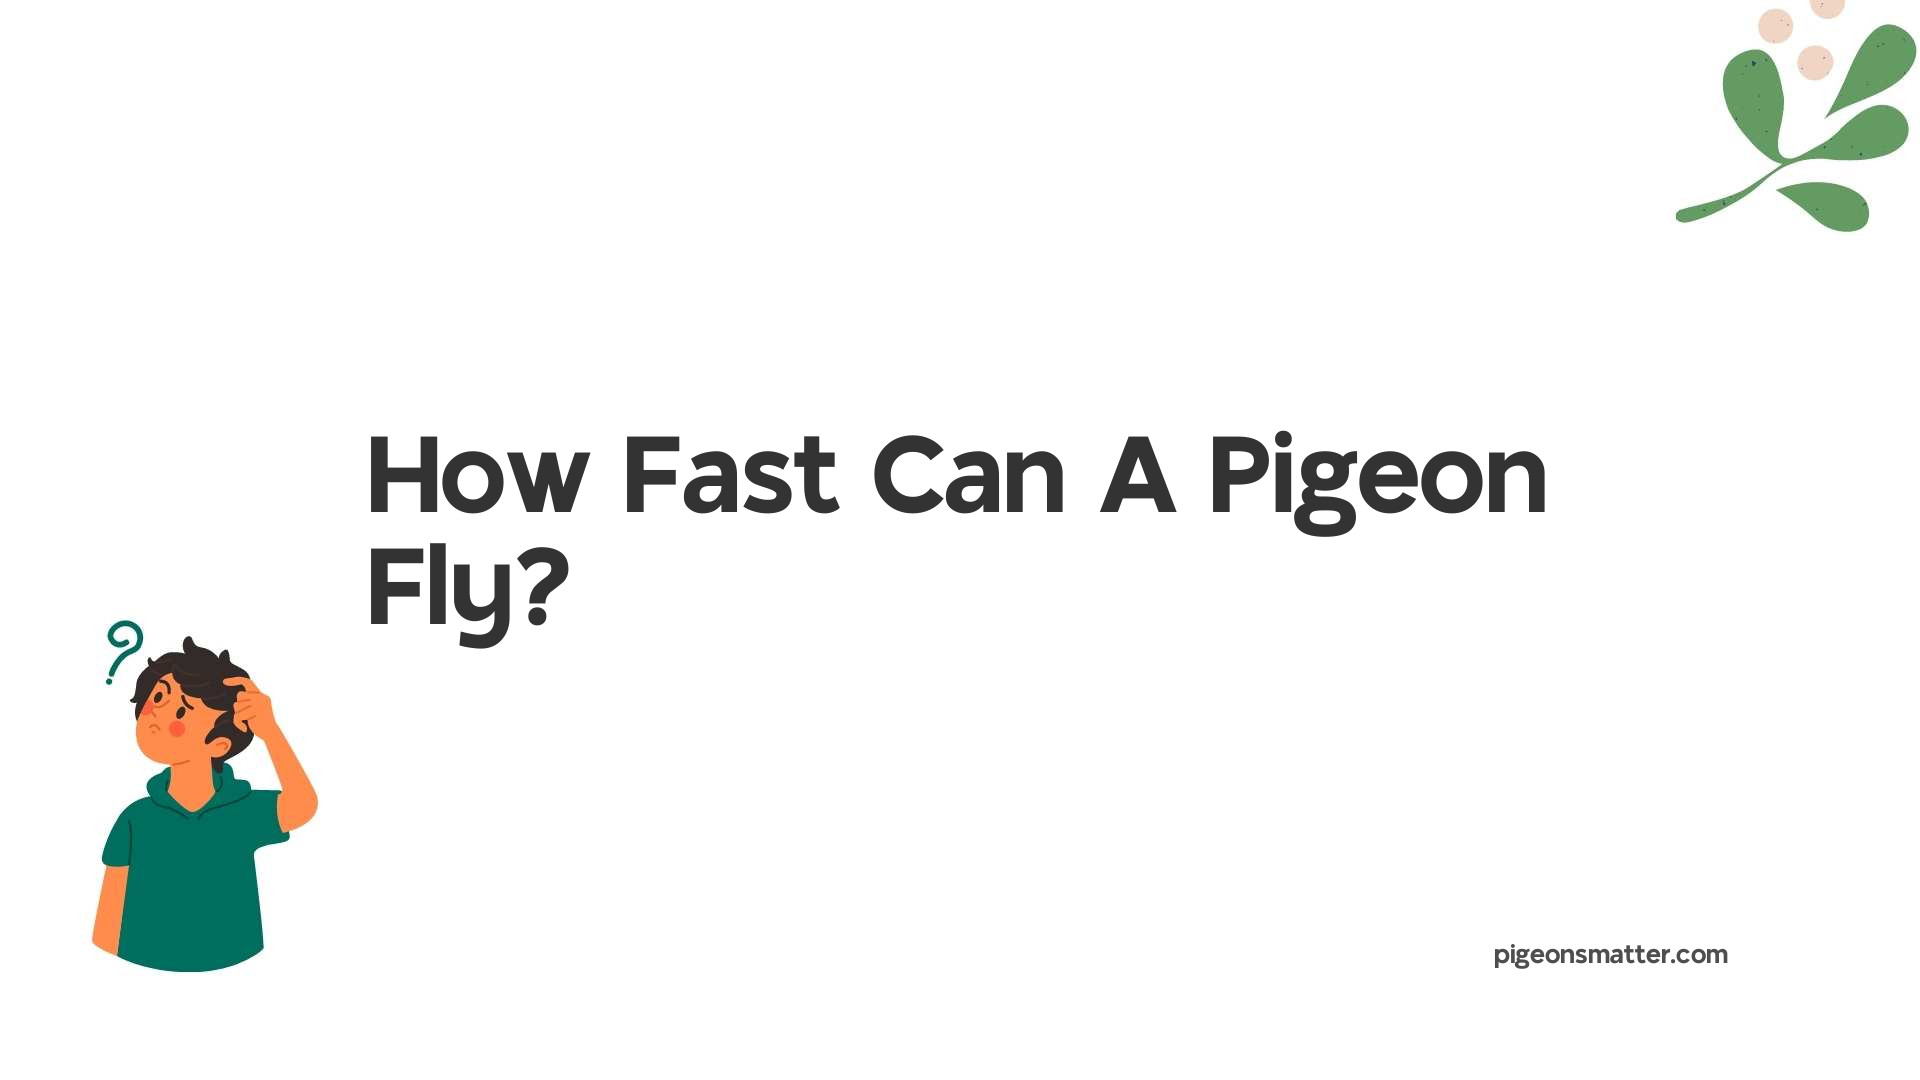 How Fast Can A Pigeon Fly?